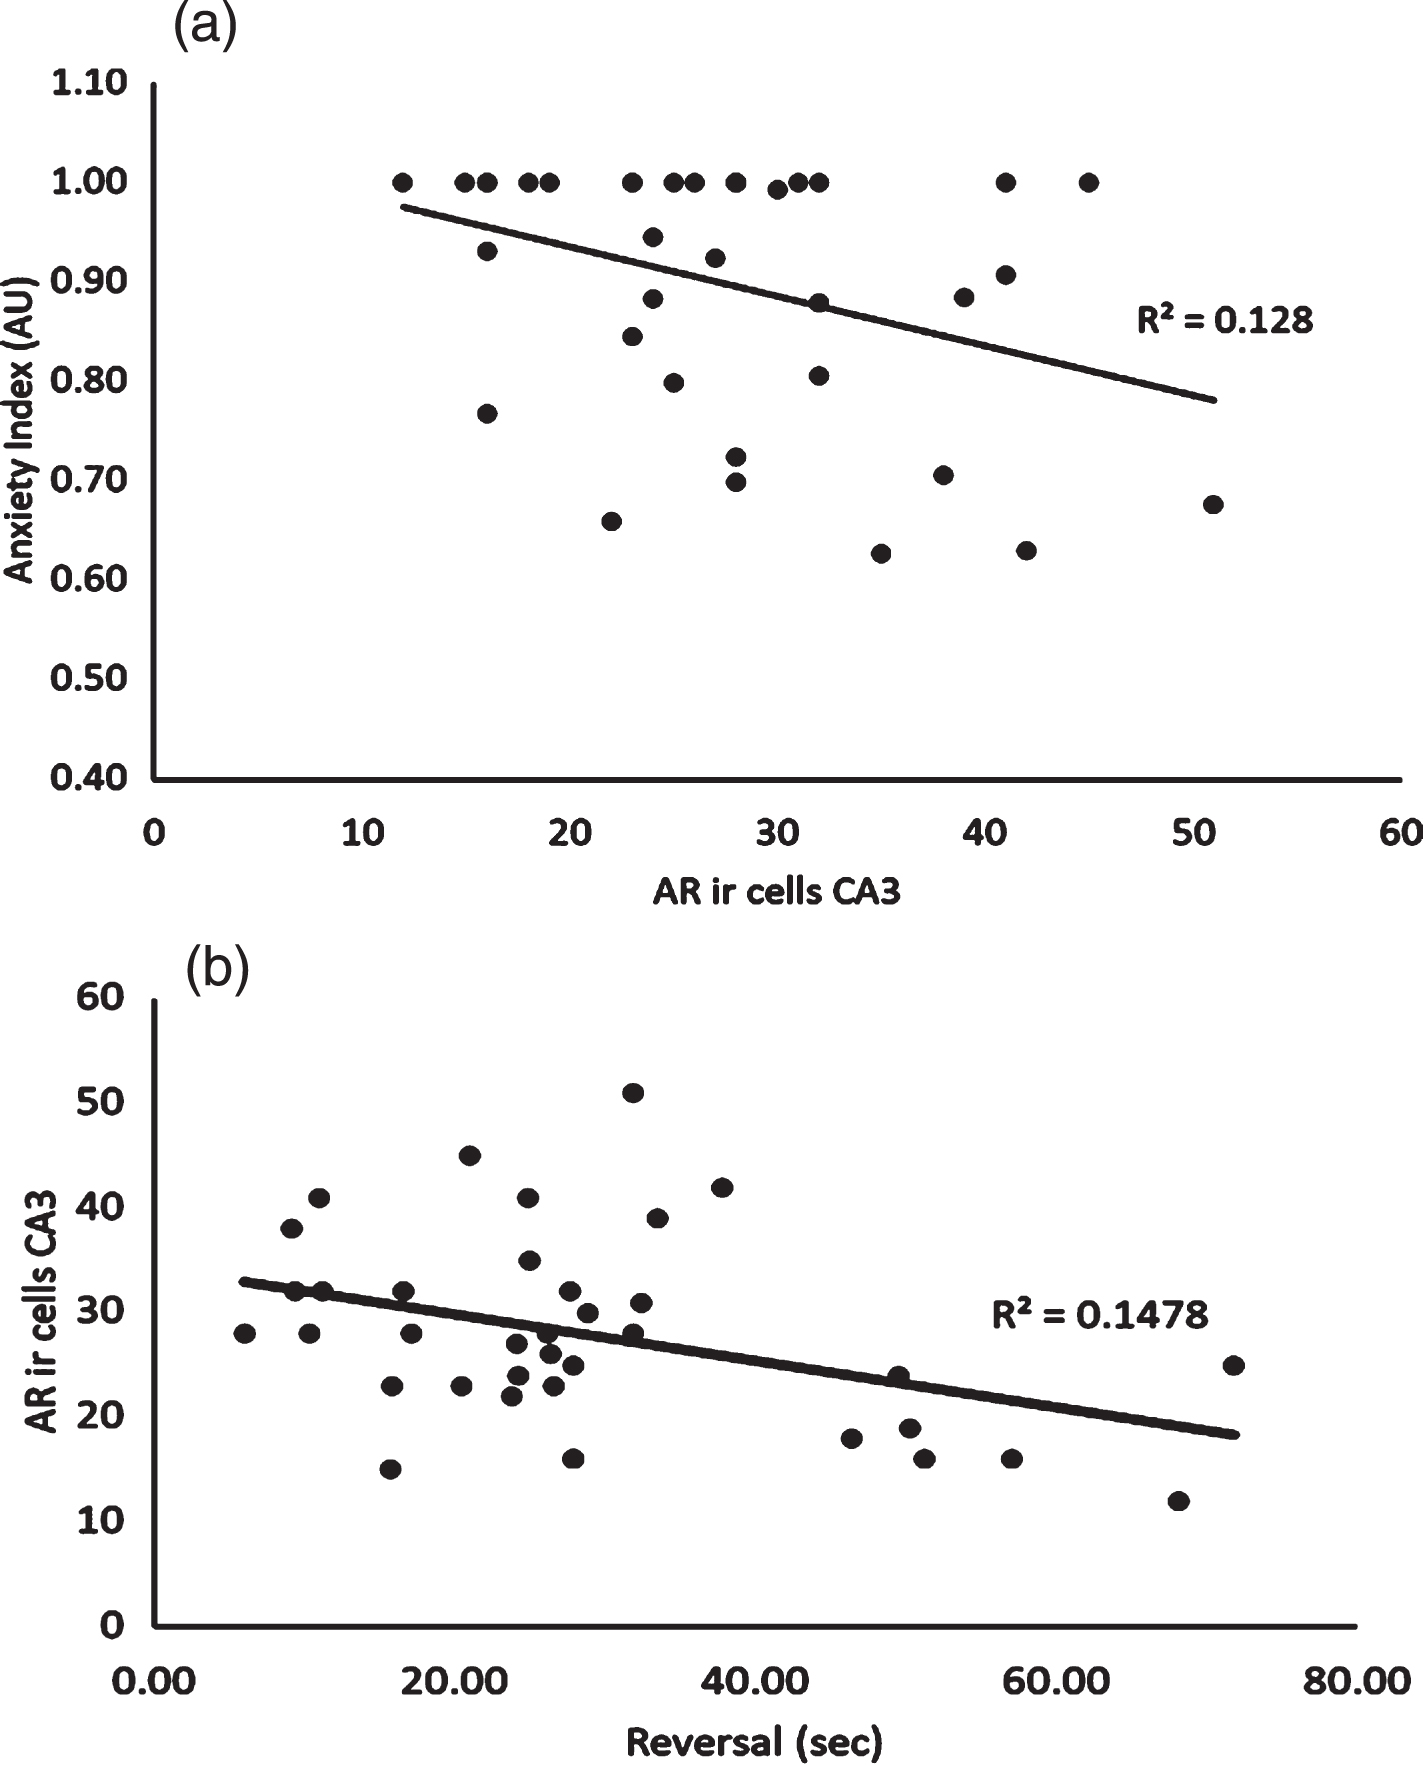 Relationship between Androgen Receptor Expression in the CA3 Subregion of the Hippocampus and Anxiety Index. 6b: Relationship between Androgen Receptor Expression in the CA3 Subregion of the Hippocampus and Average Latency Time Achieved during Reversal Phase of the Morris Water Maze.